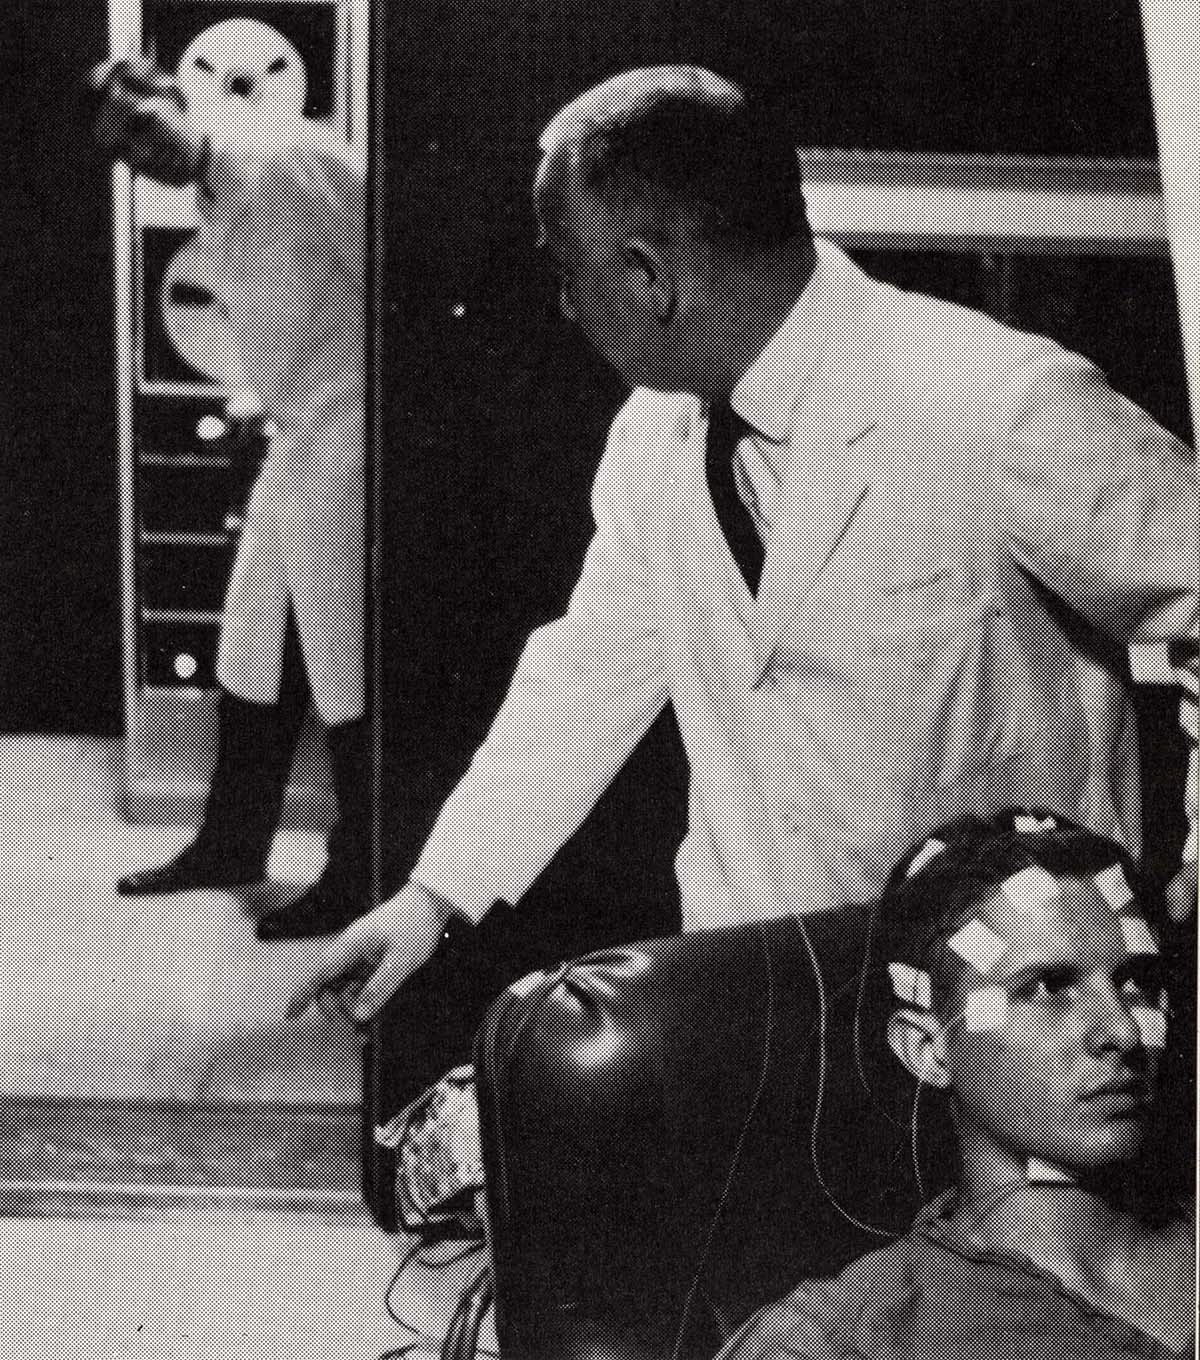 A doctor comes around the corner to find his colleague putting a patient through an Electroencephalography (EEG) test